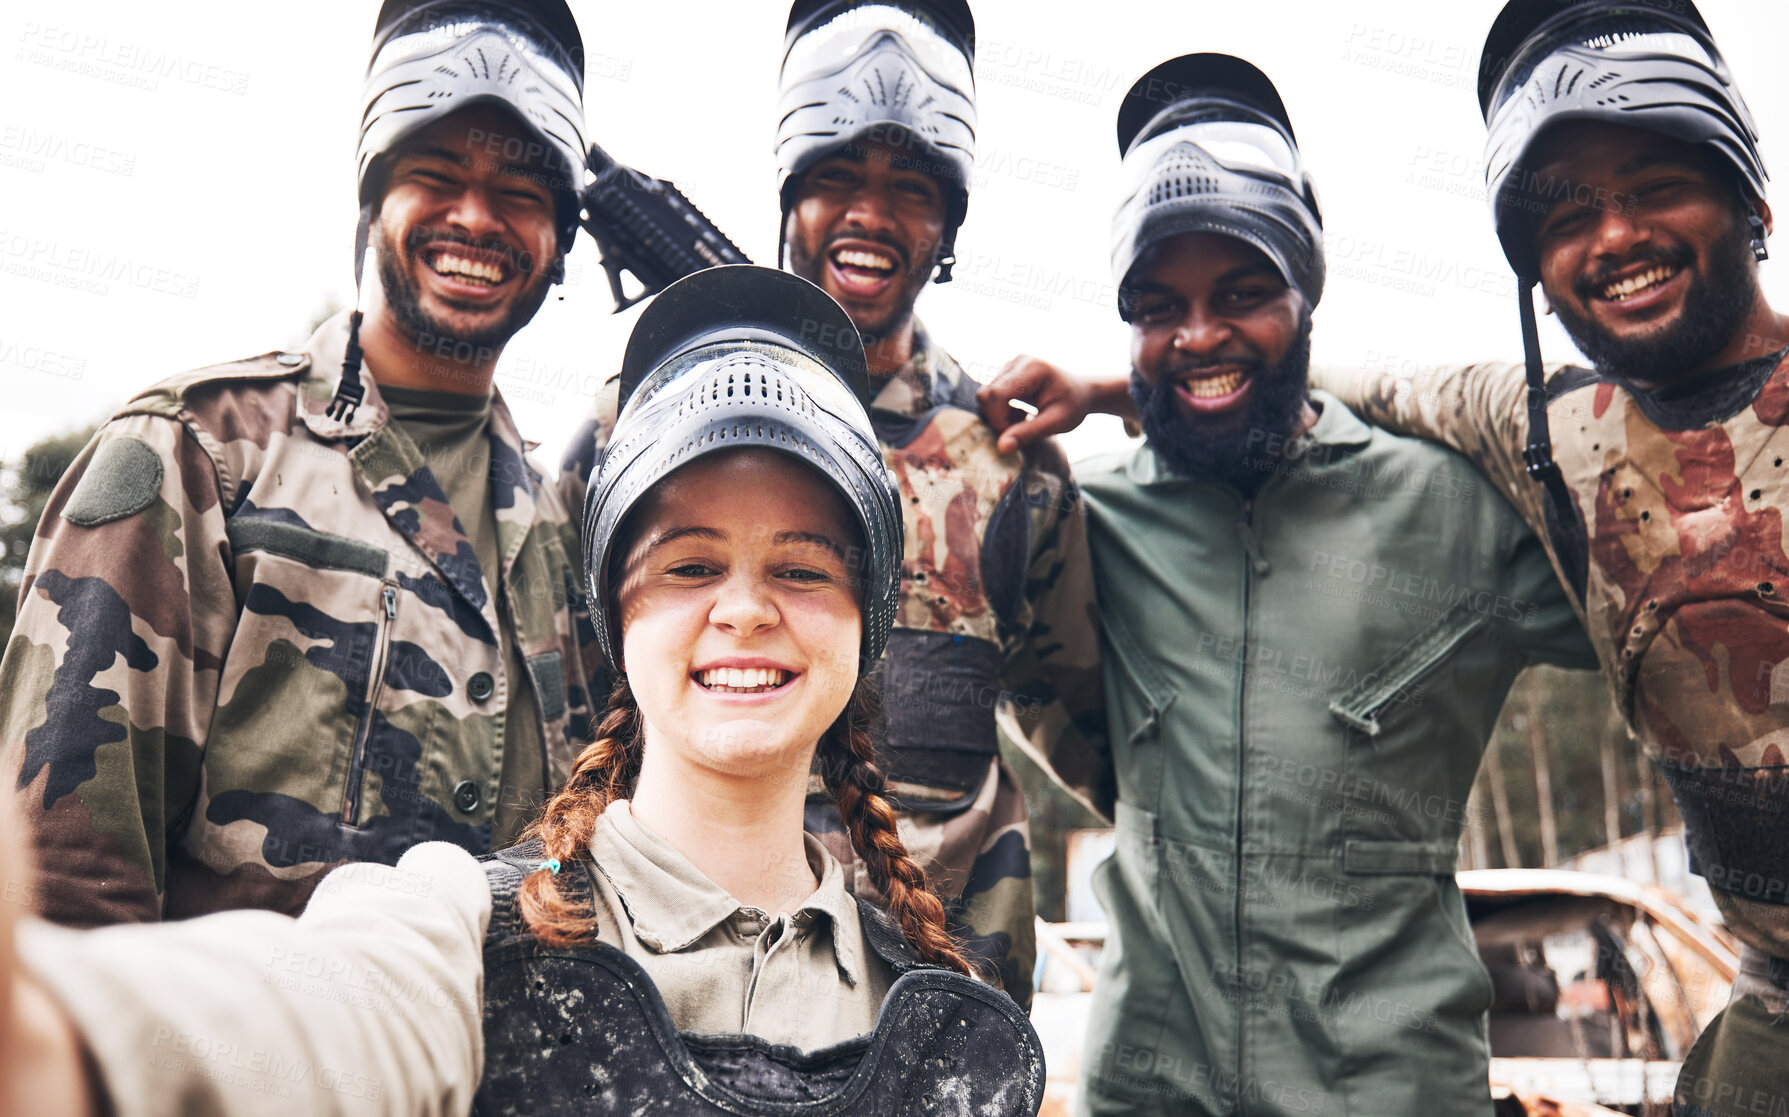 Buy stock photo Diversity, selfie and portrait of military group and paintball gun for training, fun or extreme sports outdoor. Face, friends and army people, smile for team sport, photo or ready for target practice